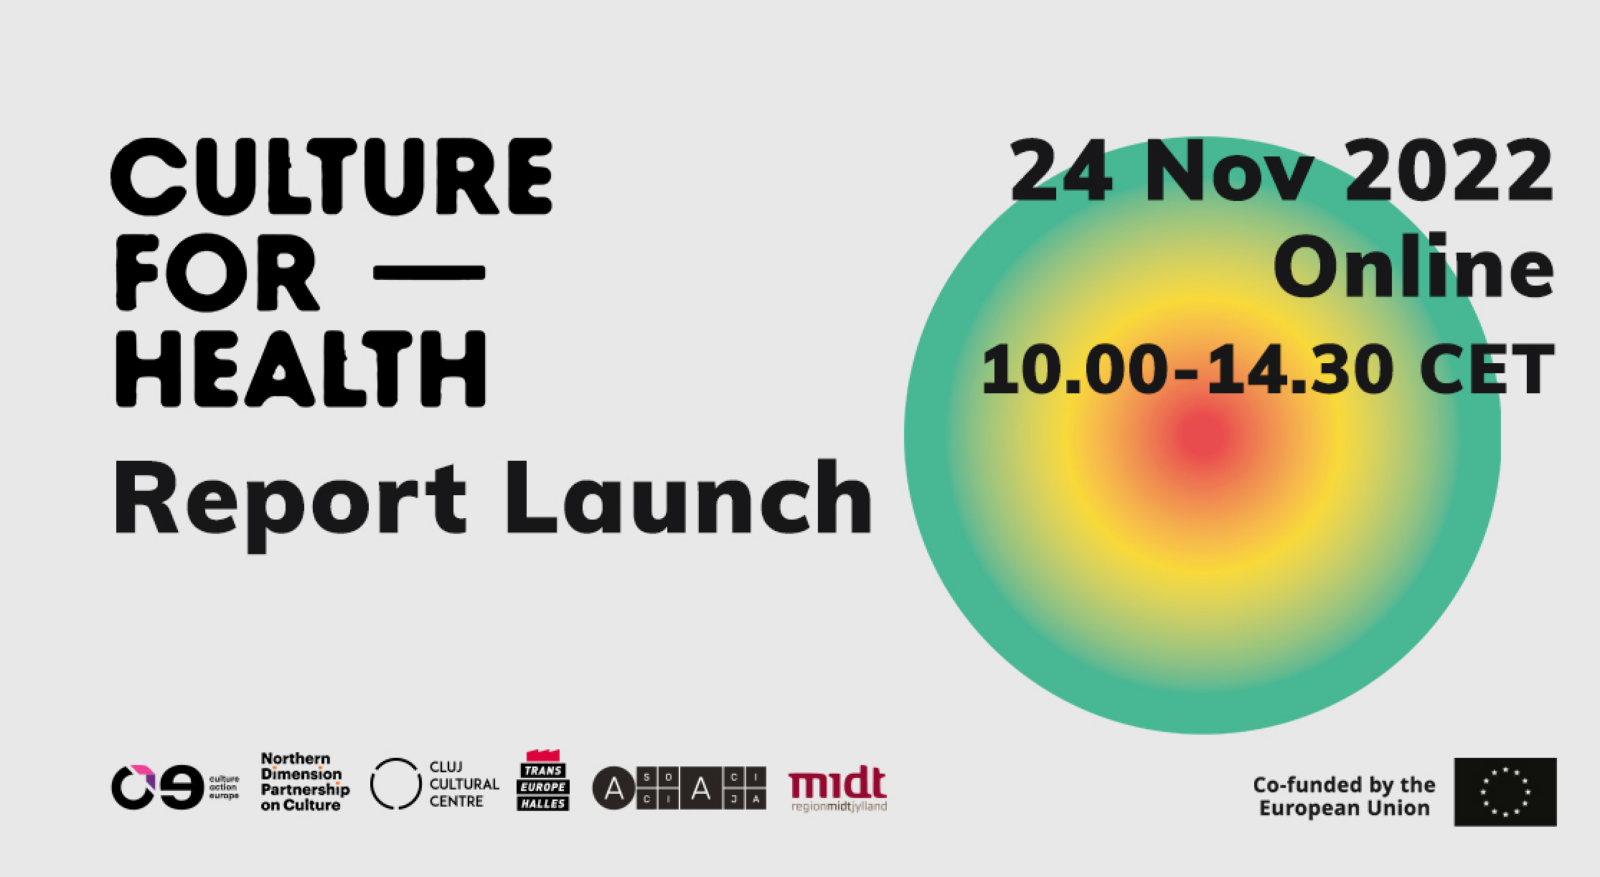 Launch of The CultureForHealth Report!